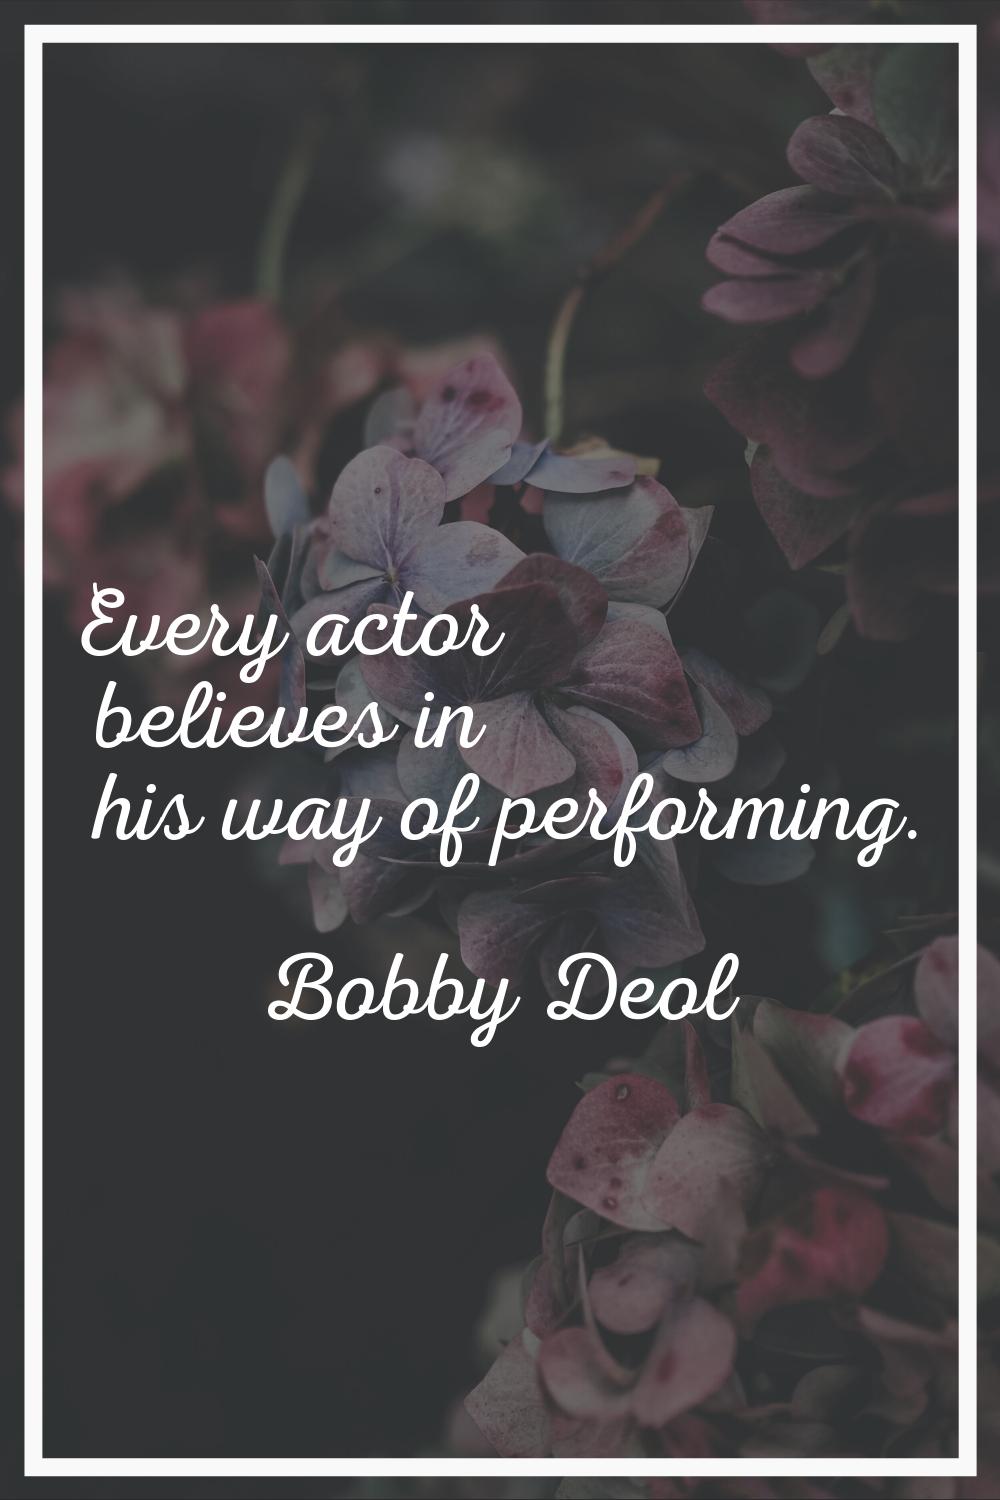 Every actor believes in his way of performing.